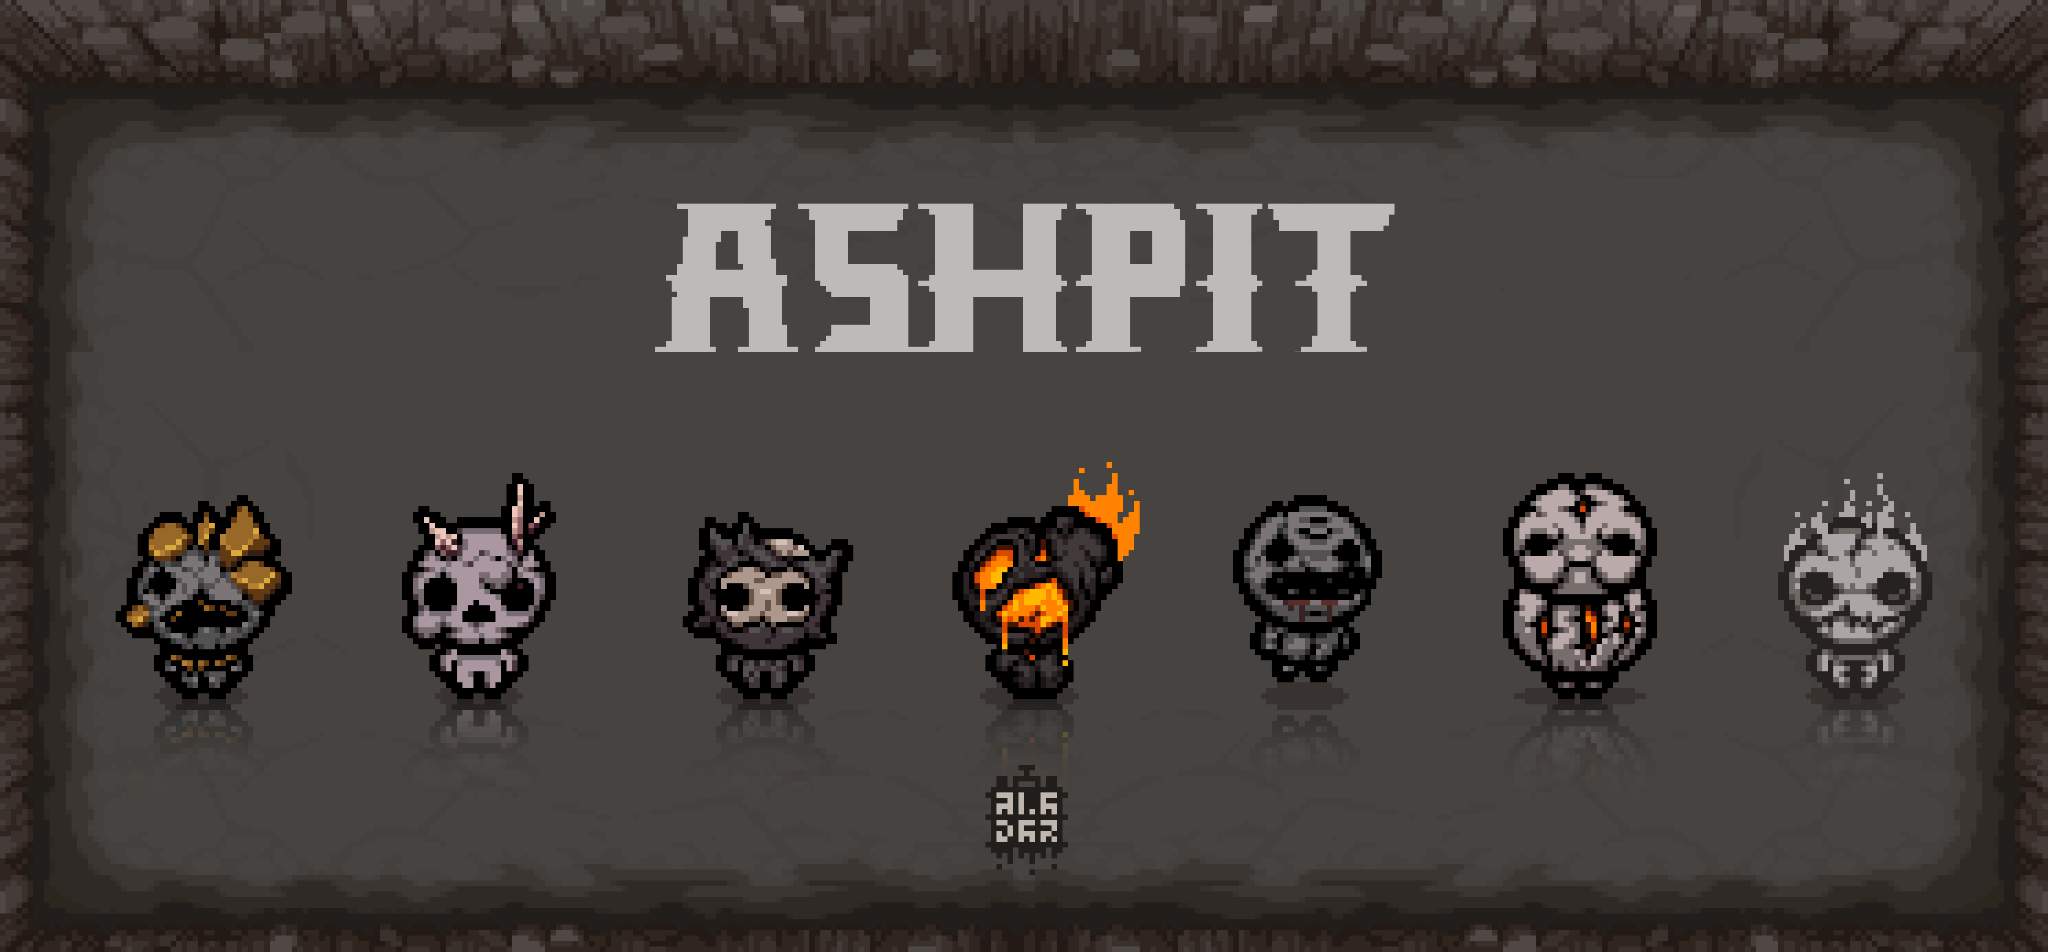 7 Deadly Sins For Ashpit The Binding Of Isaac Official Amino 6462